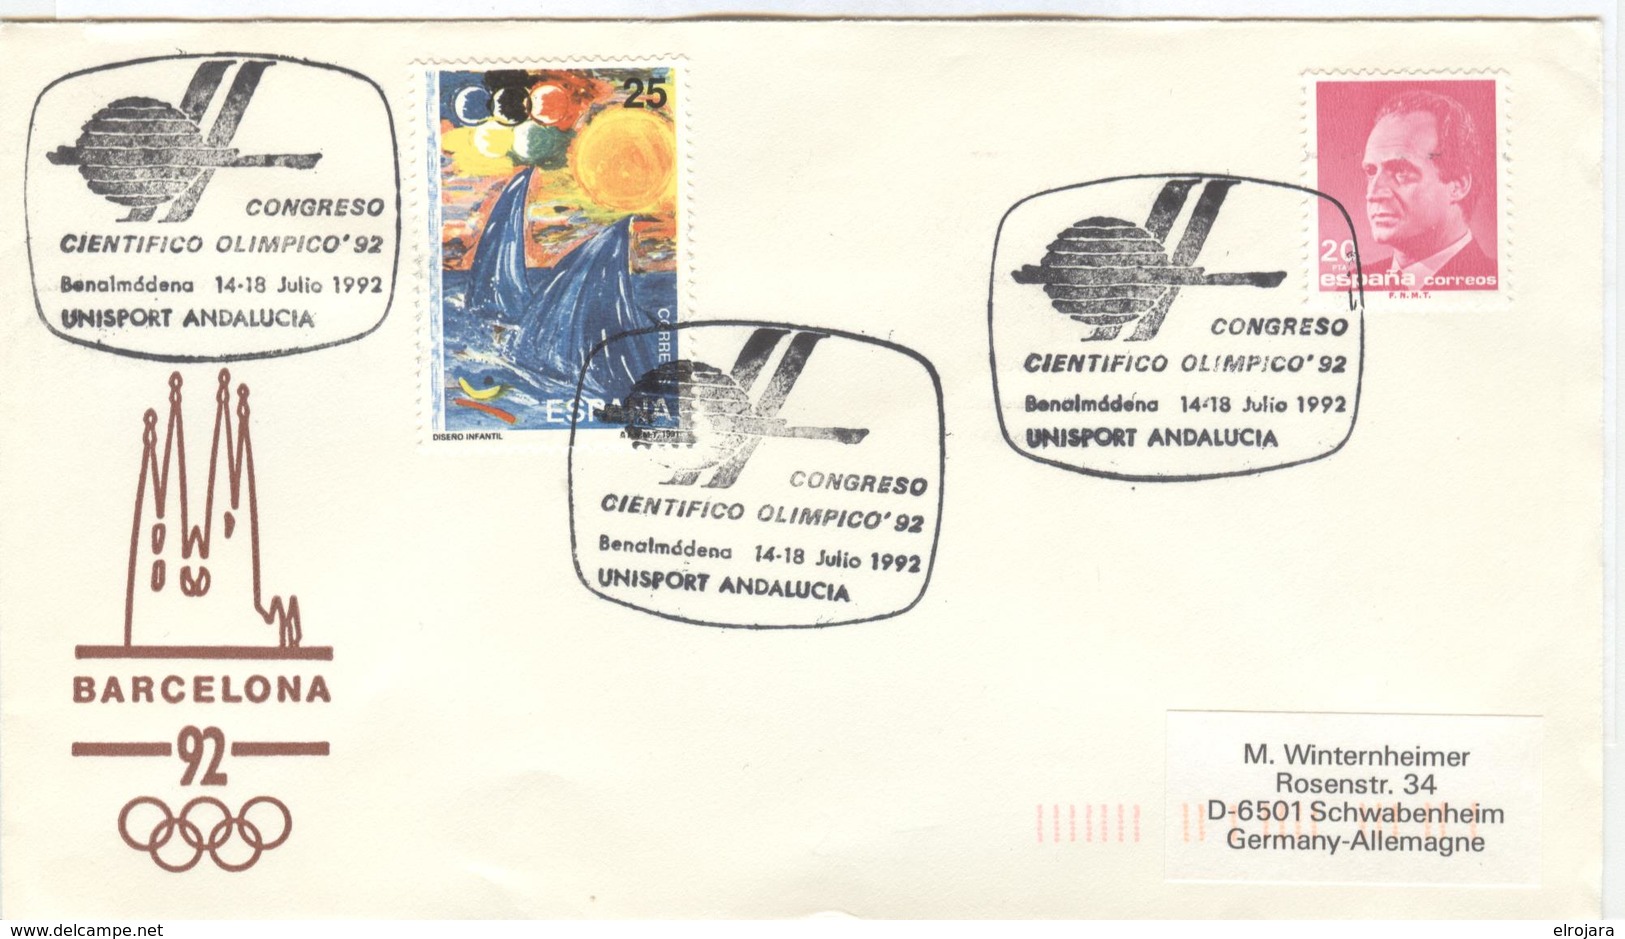 SPAIN Olympic Cover With Olympic Stamp And Handcancel Benalmddena Science Olympic Congress - Summer 1992: Barcelona